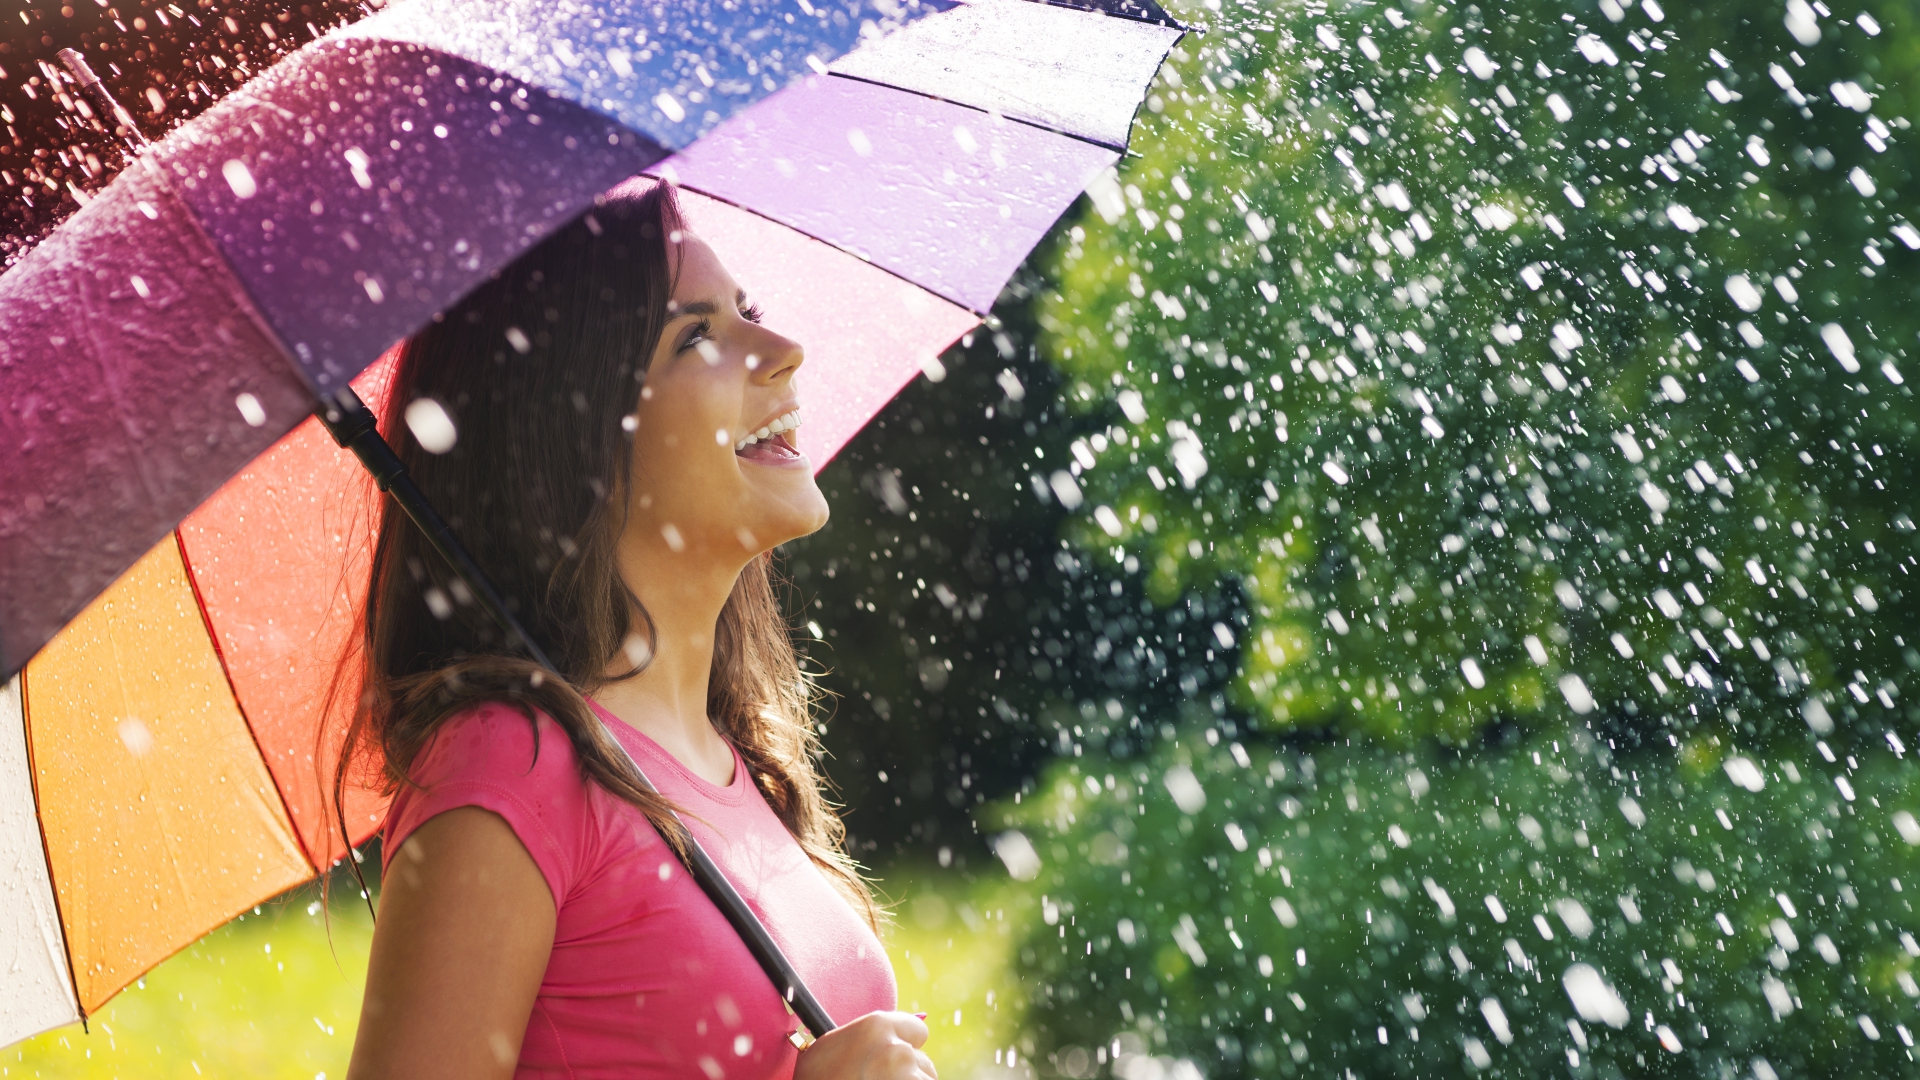 How to take care of your eyes during the monsoon season?